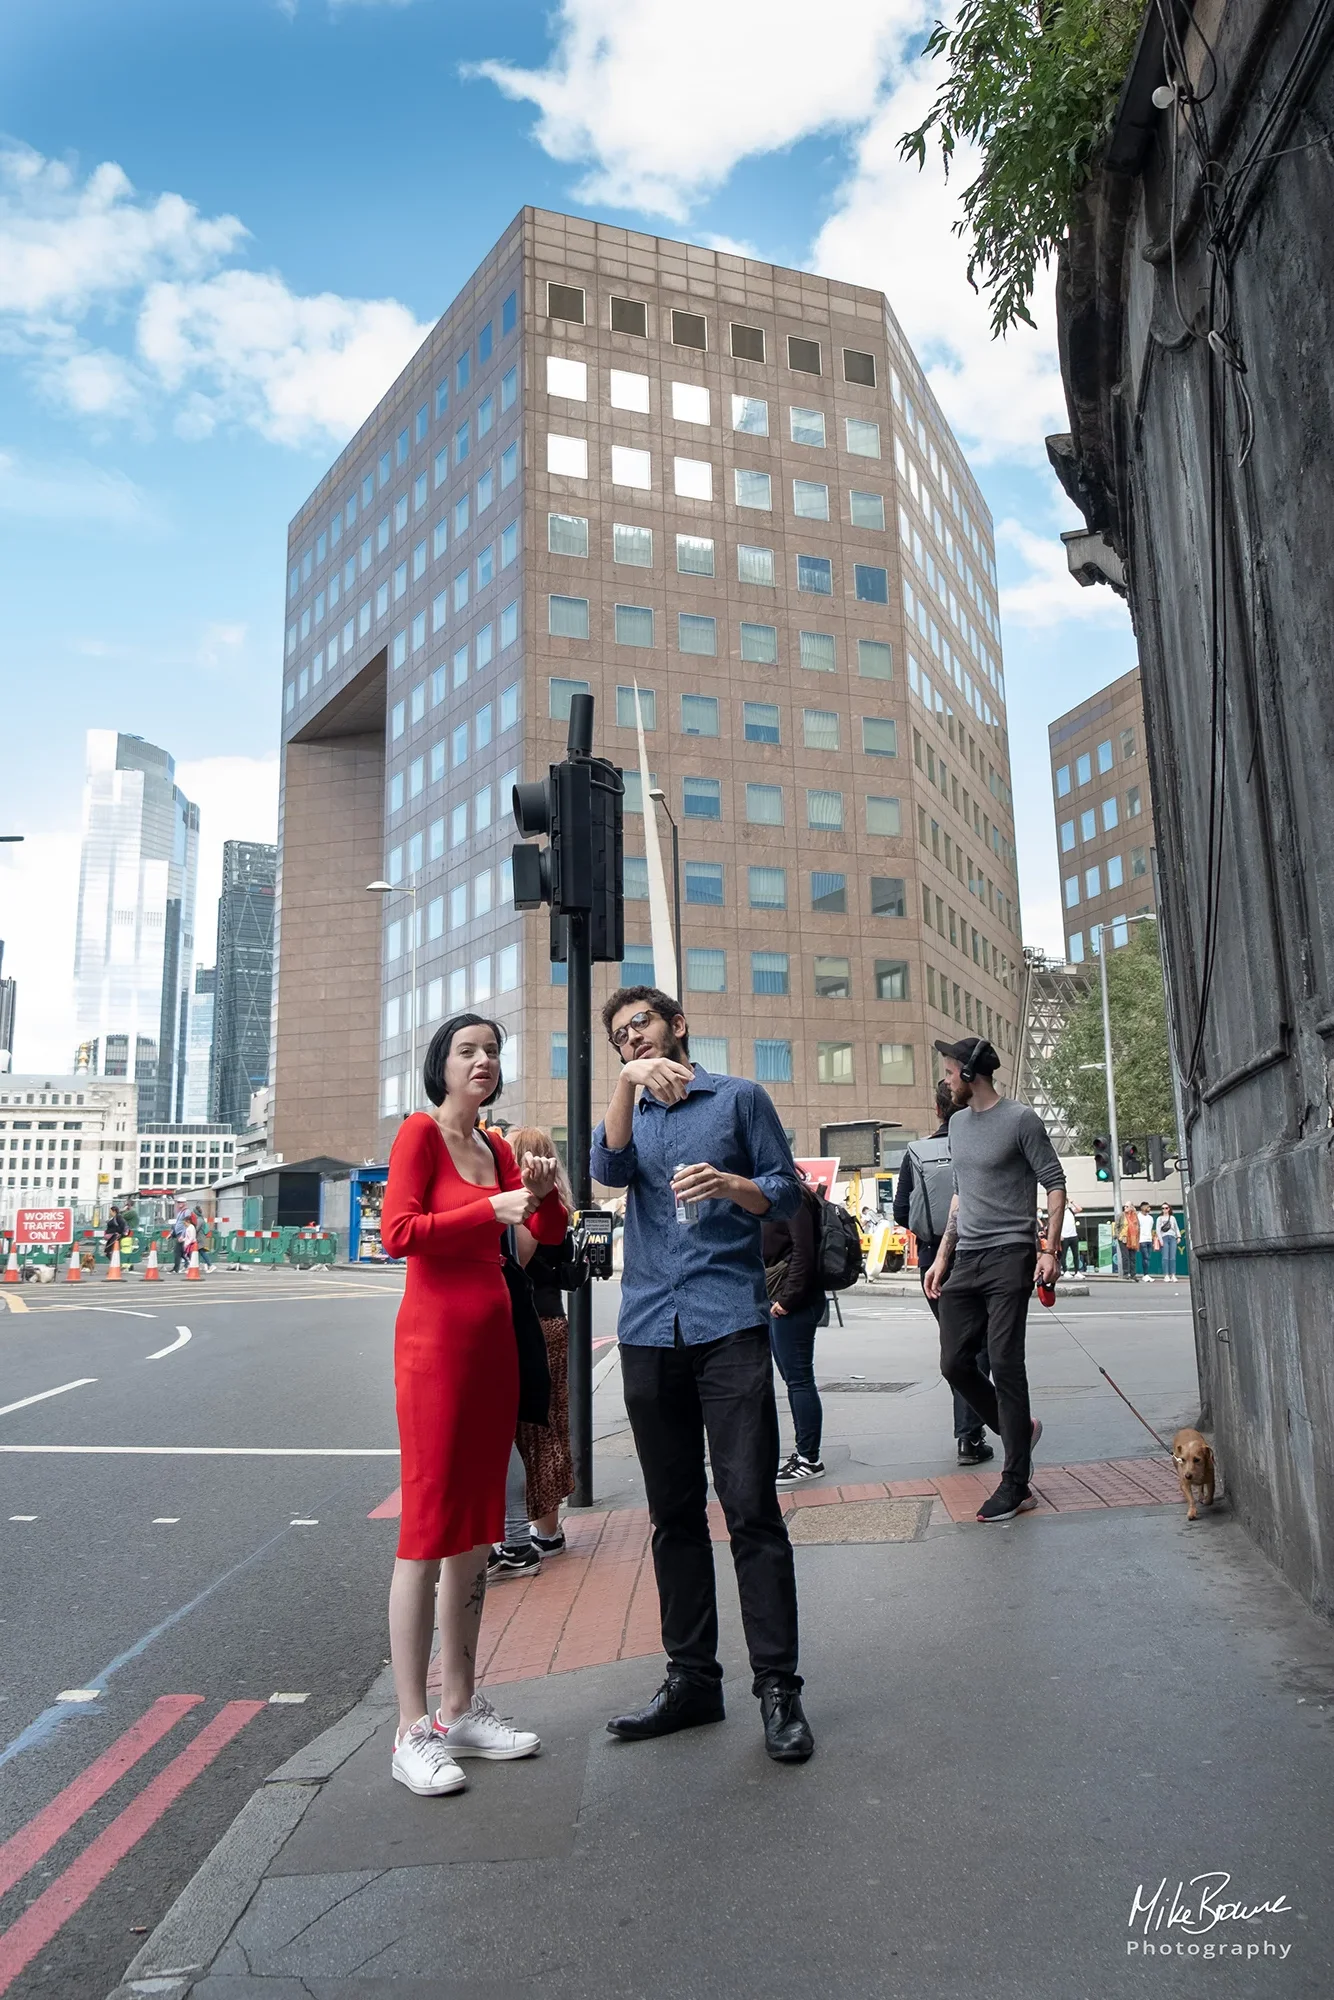 Woman in a red dress and white trainers conversing with a man stood by traffic lights in front of modernist building